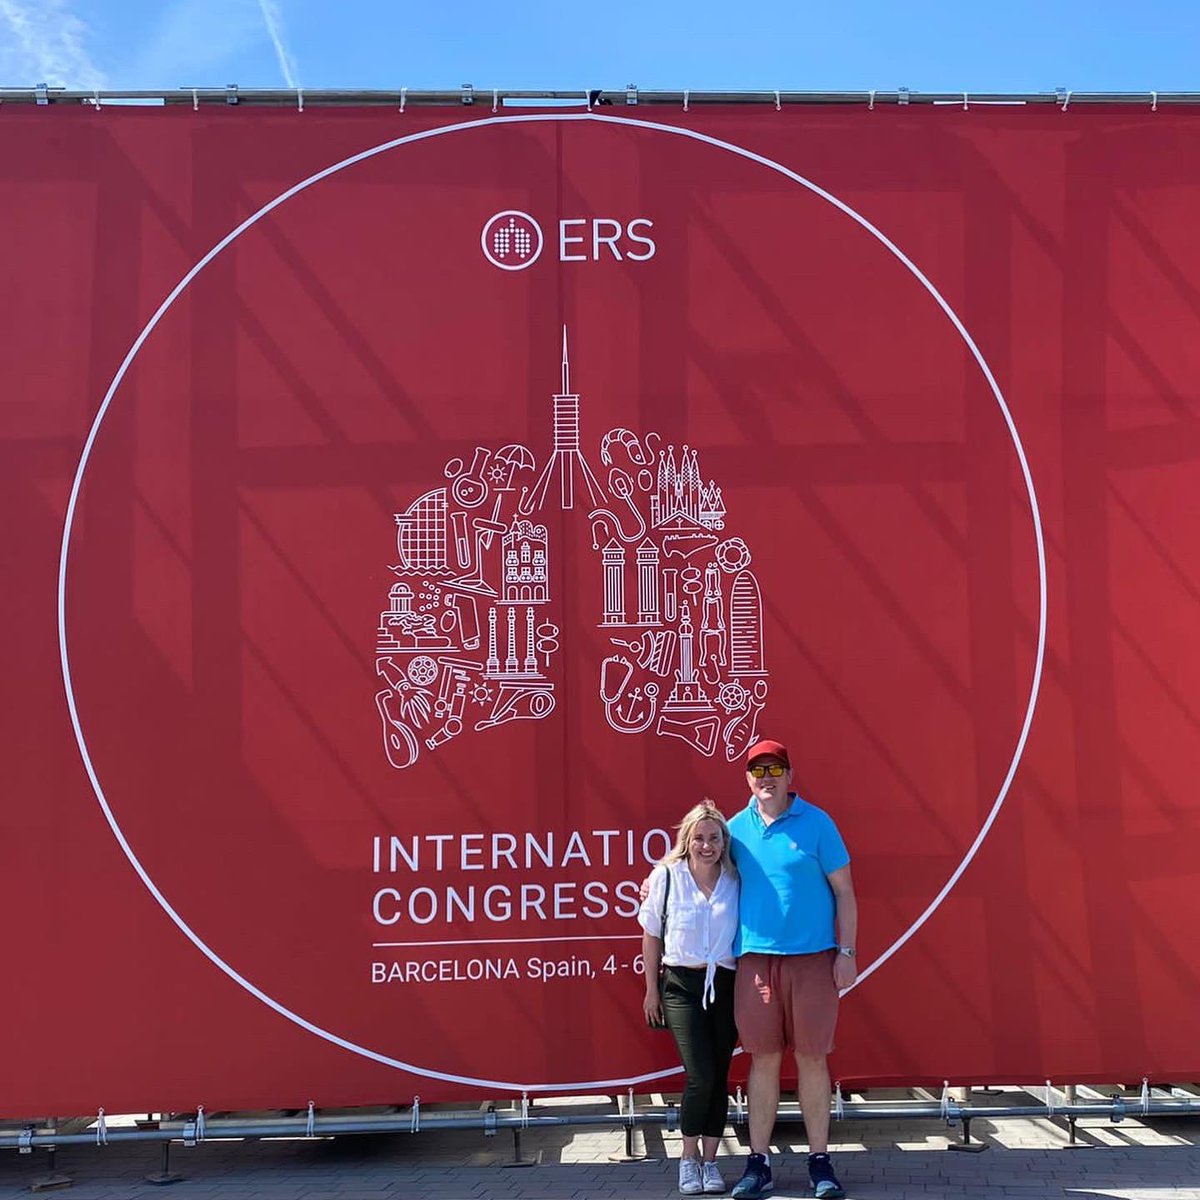 Had an wonderful time at #ERS2022 in Barcelona - such a joy after spending most of my advanced training in lockdown/unable to go to face to face conferences. A particular joy to be there with the legend who inspired me to do respiratory/worlds greatest mentor.